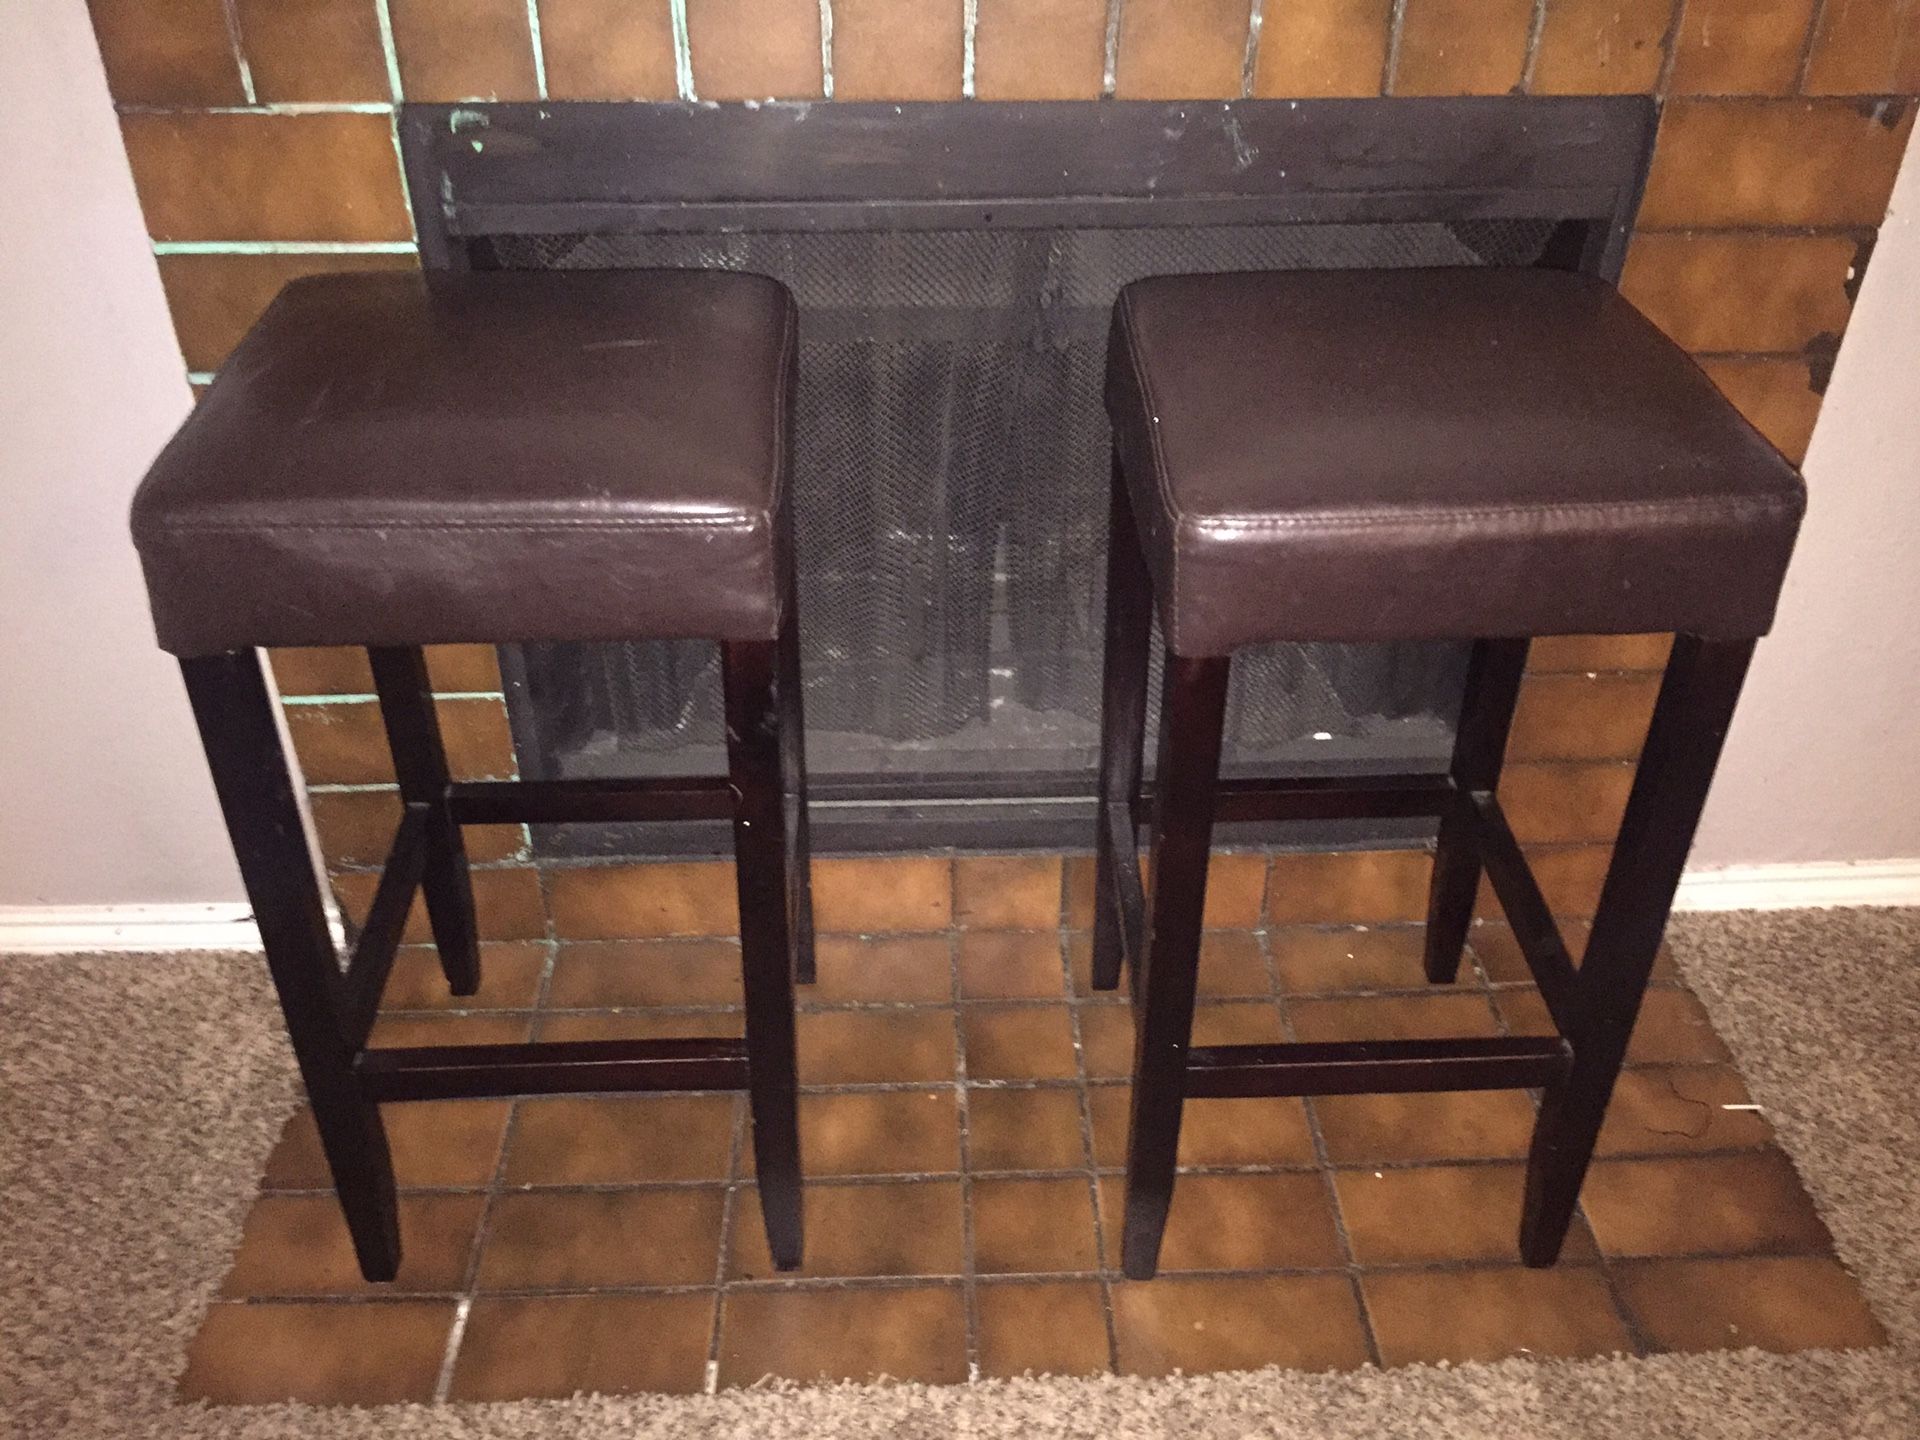 Leather stools for bar area or lounge areas and I’ll throw in the light up hello sign